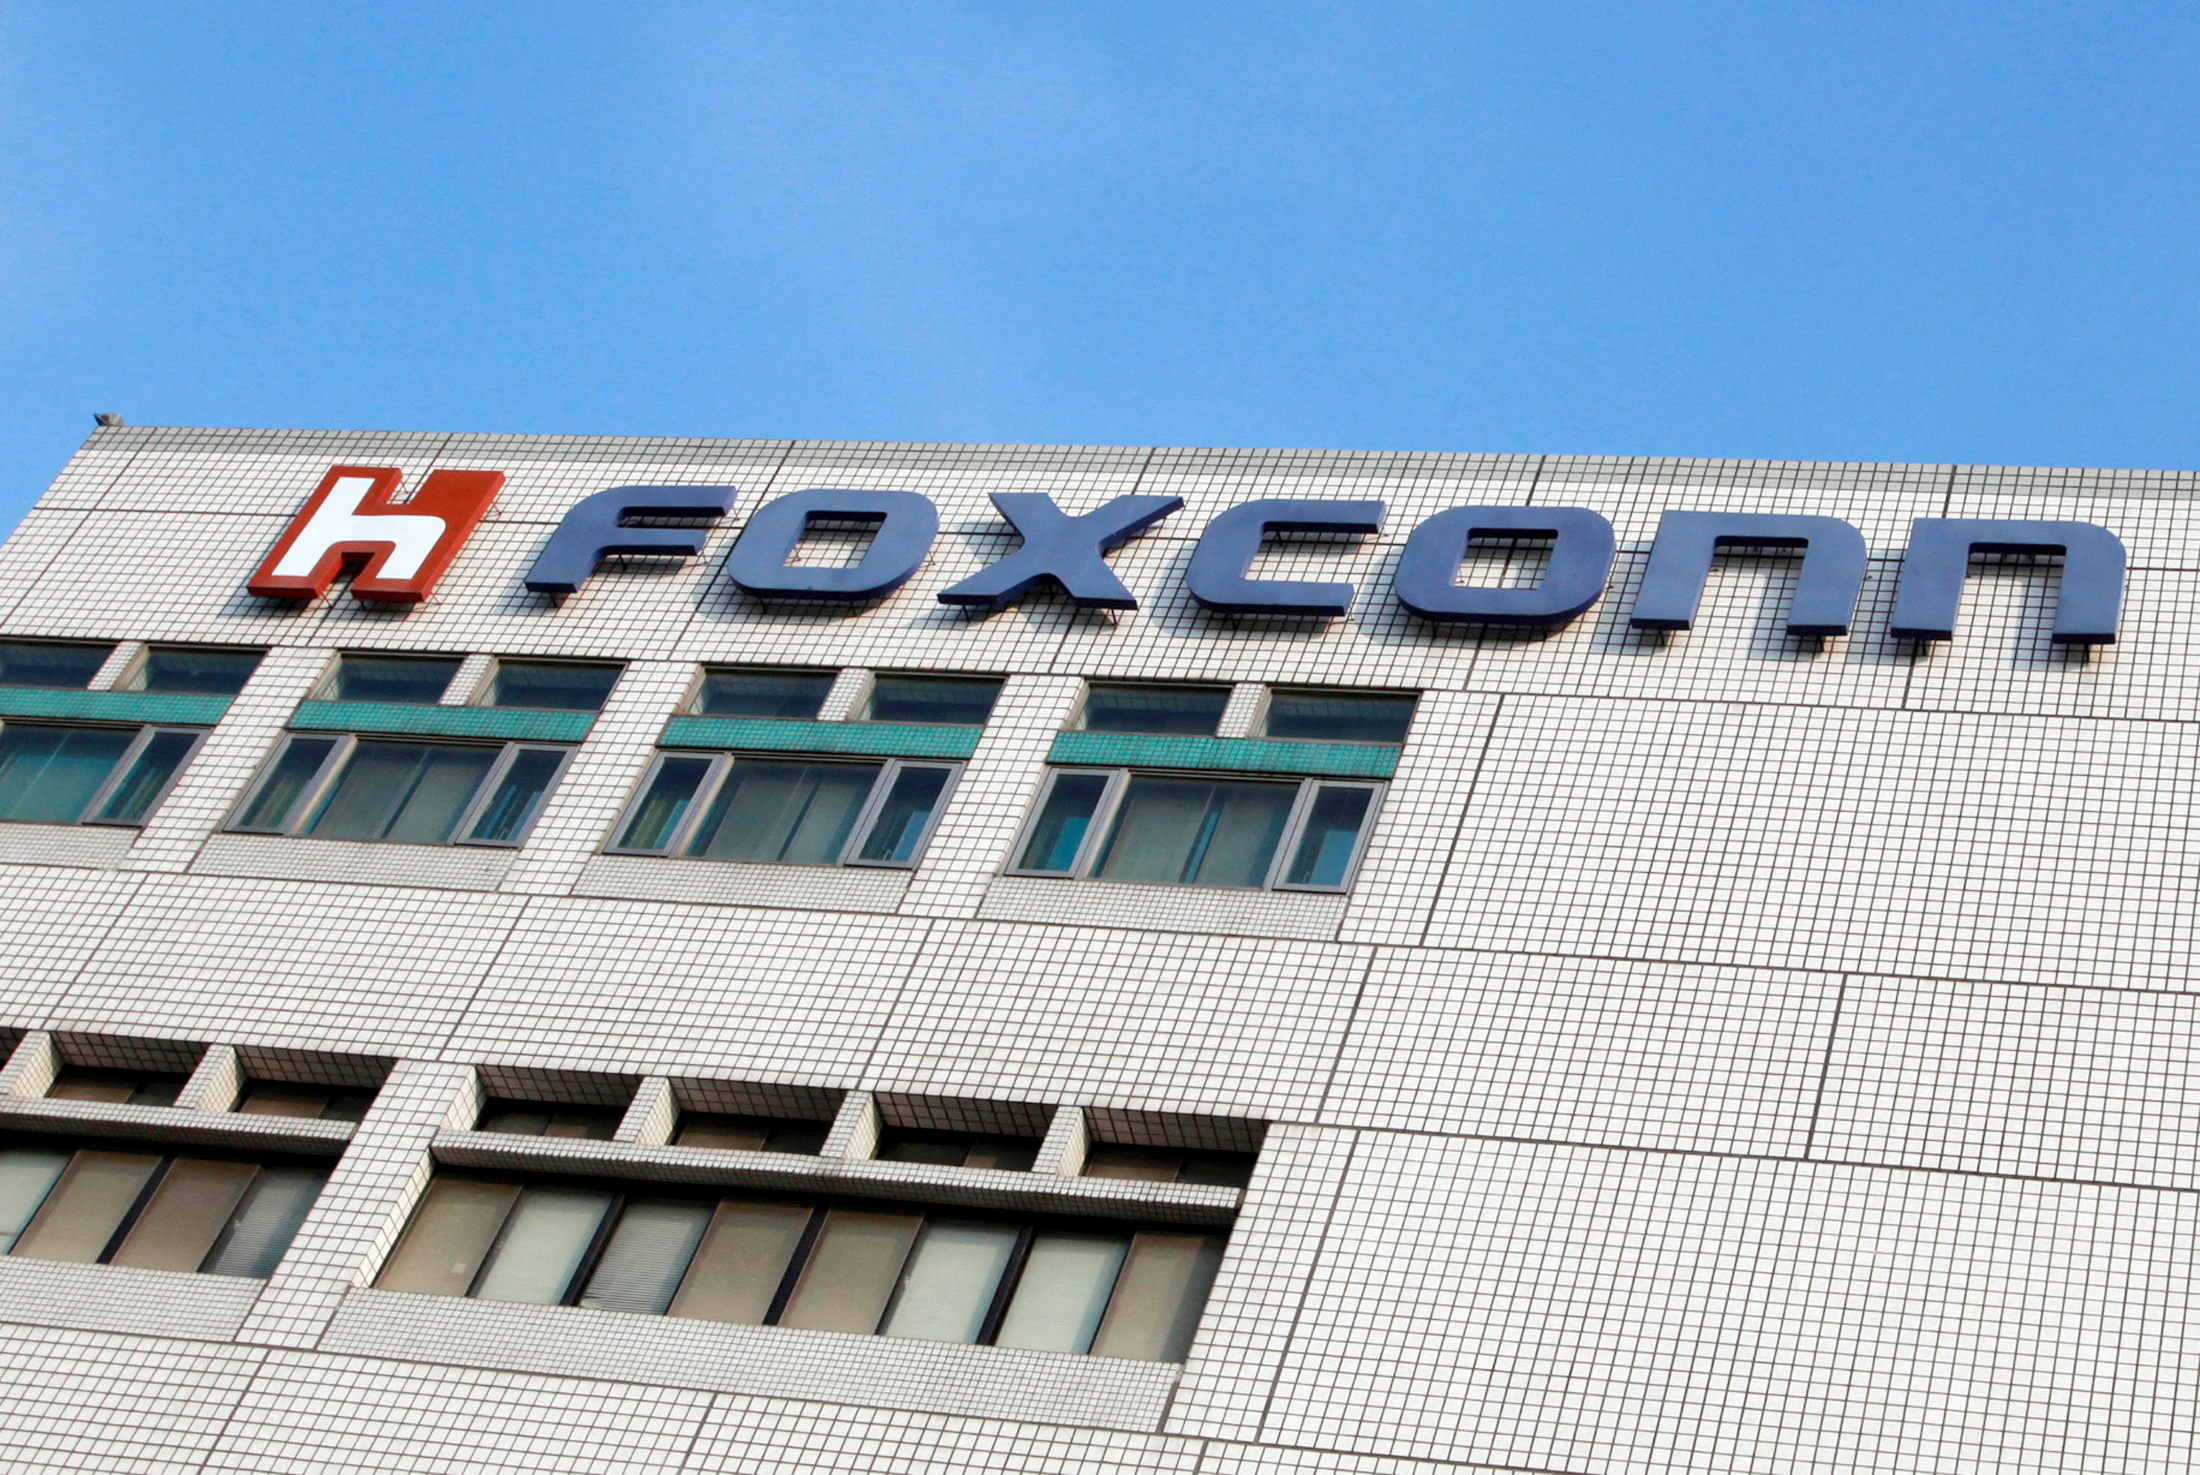 FILE PHOTO: The Foxconn logo is seen on the headquarters building in Tucheng, Taipei County